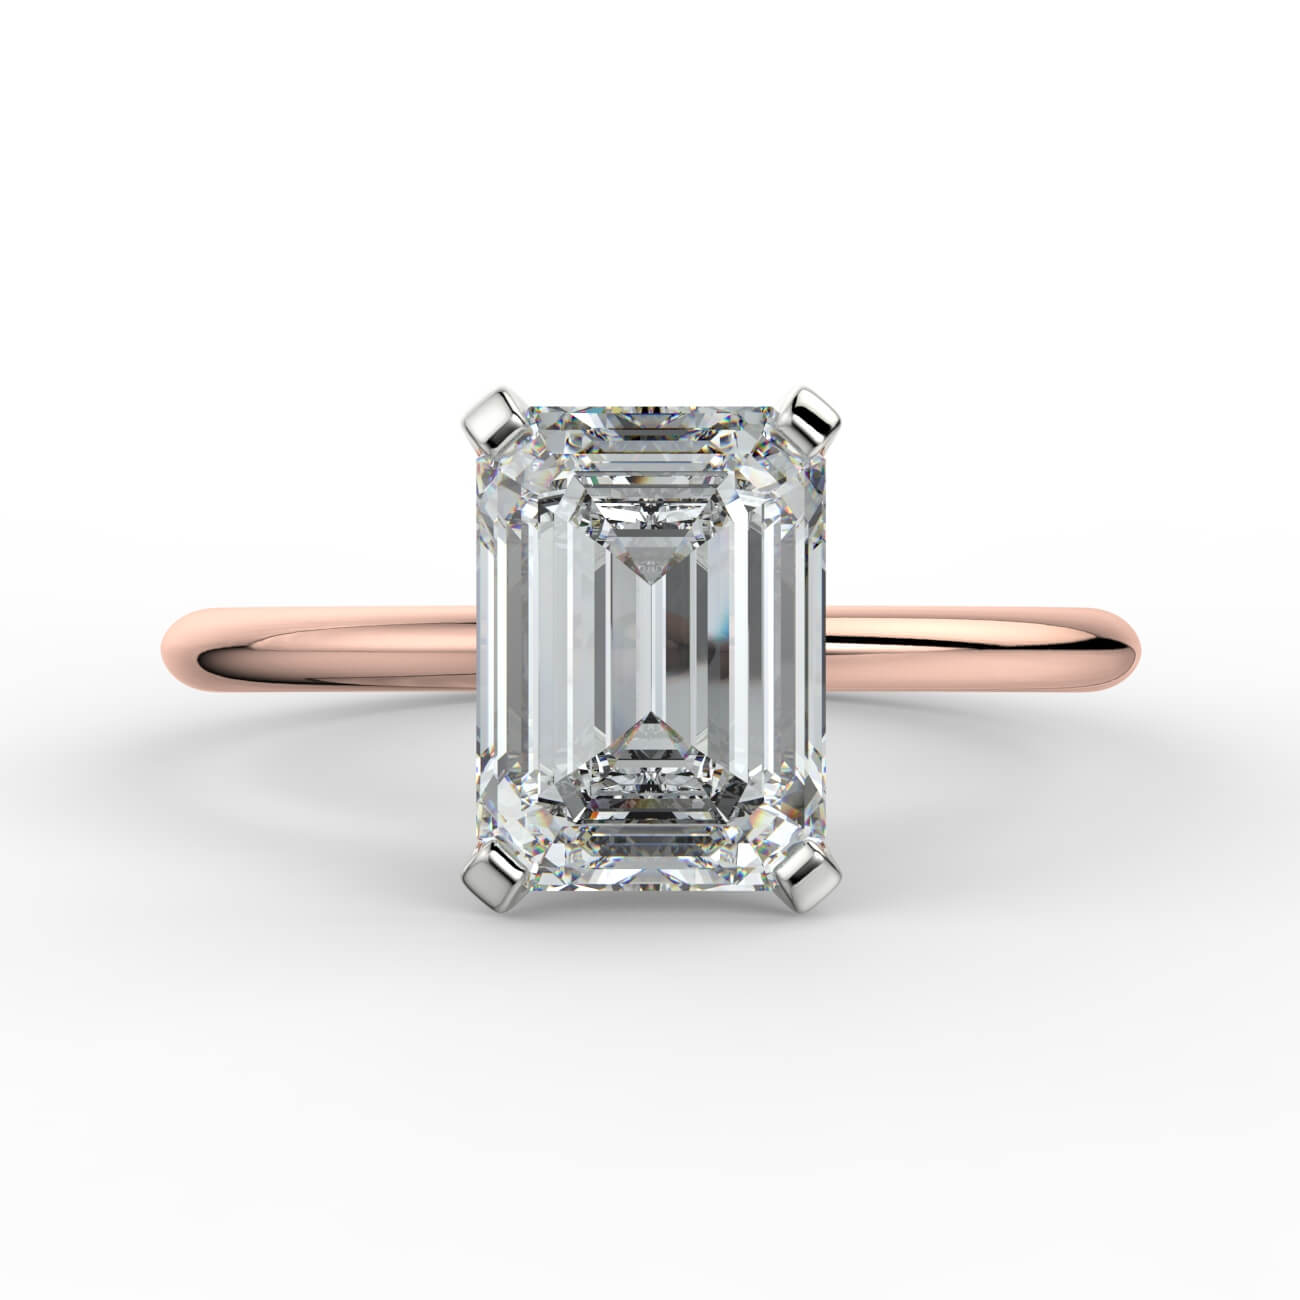 Knife-edge solitaire emerald cut diamond engagement ring in white and rose gold – Australian Diamond Network